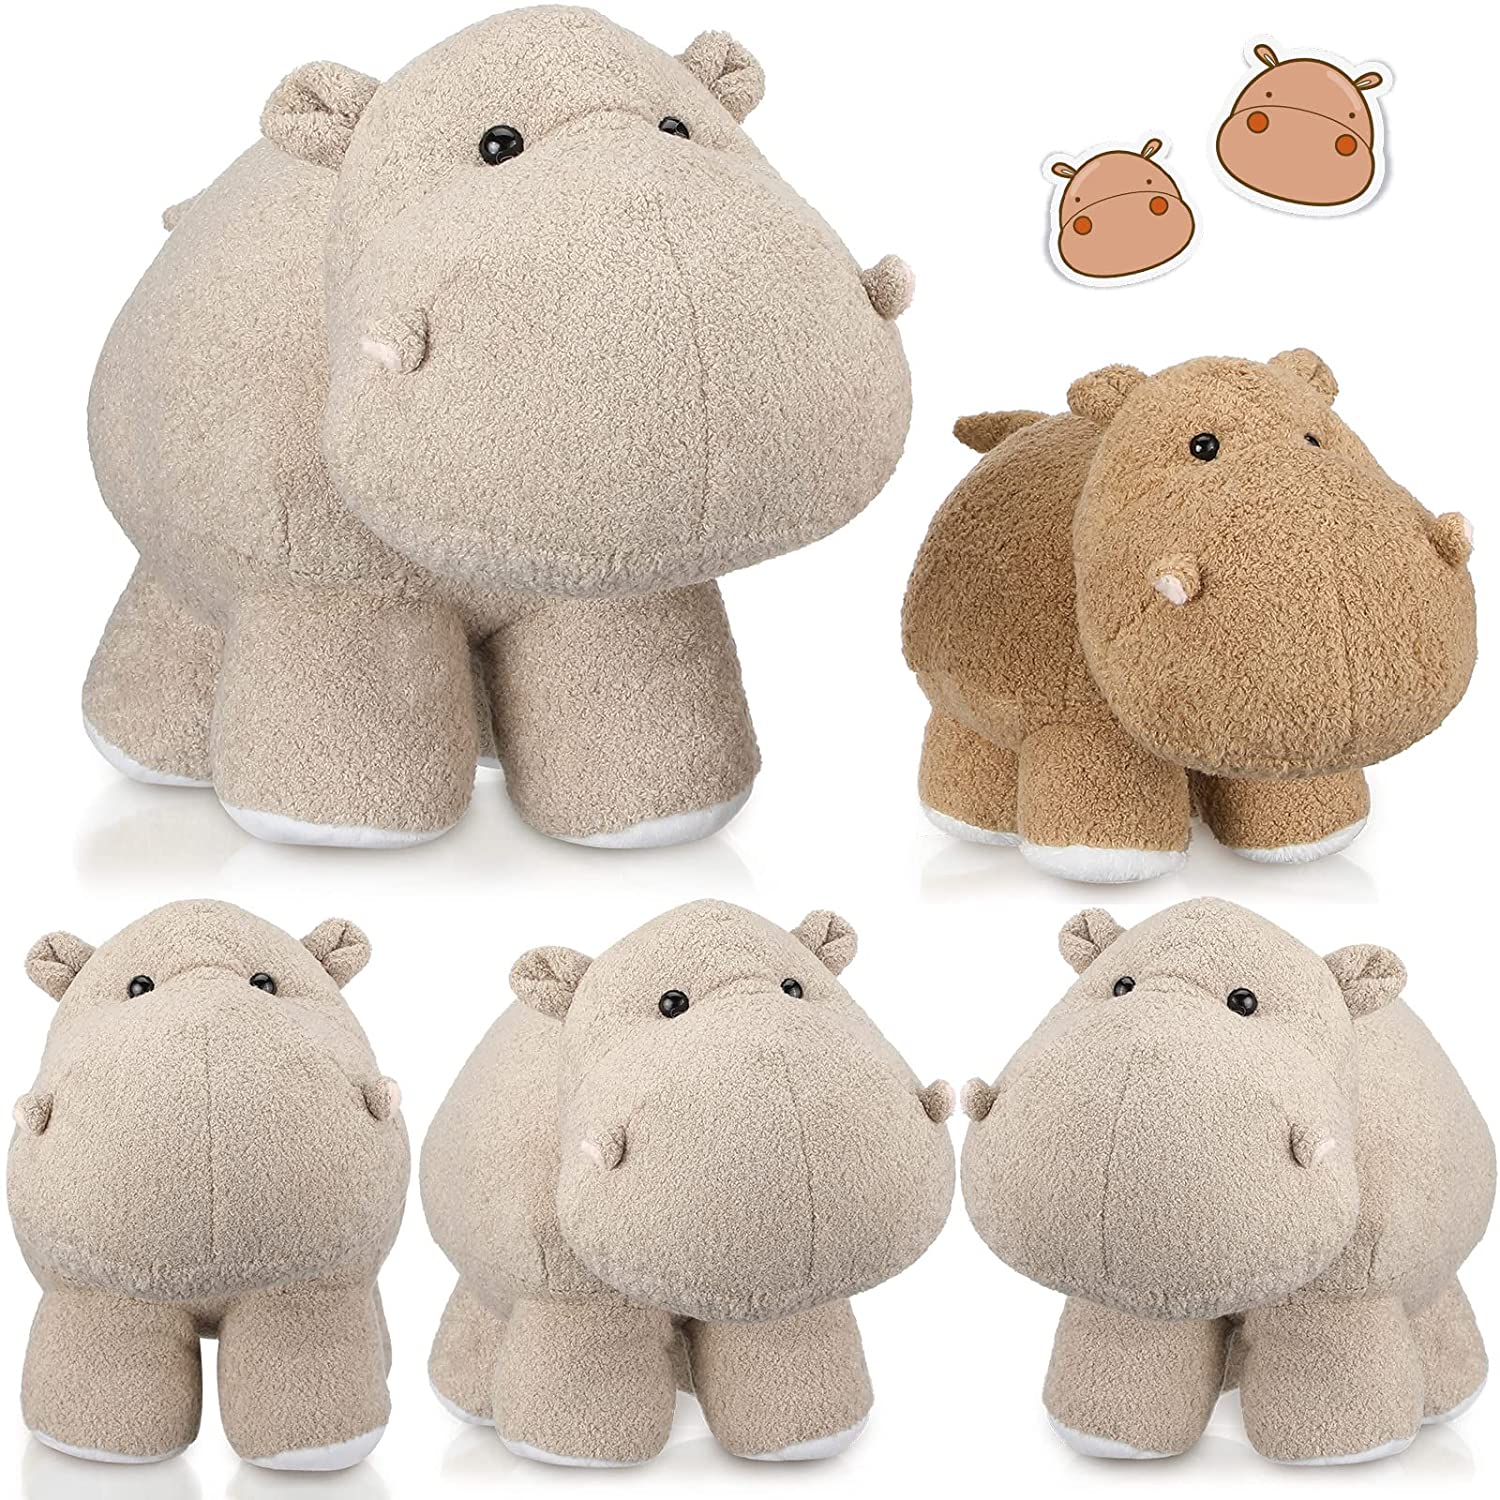 Stuffed Animals Soft Plush Animal Hippos Gift Gifts Mother and Baby Hippo 